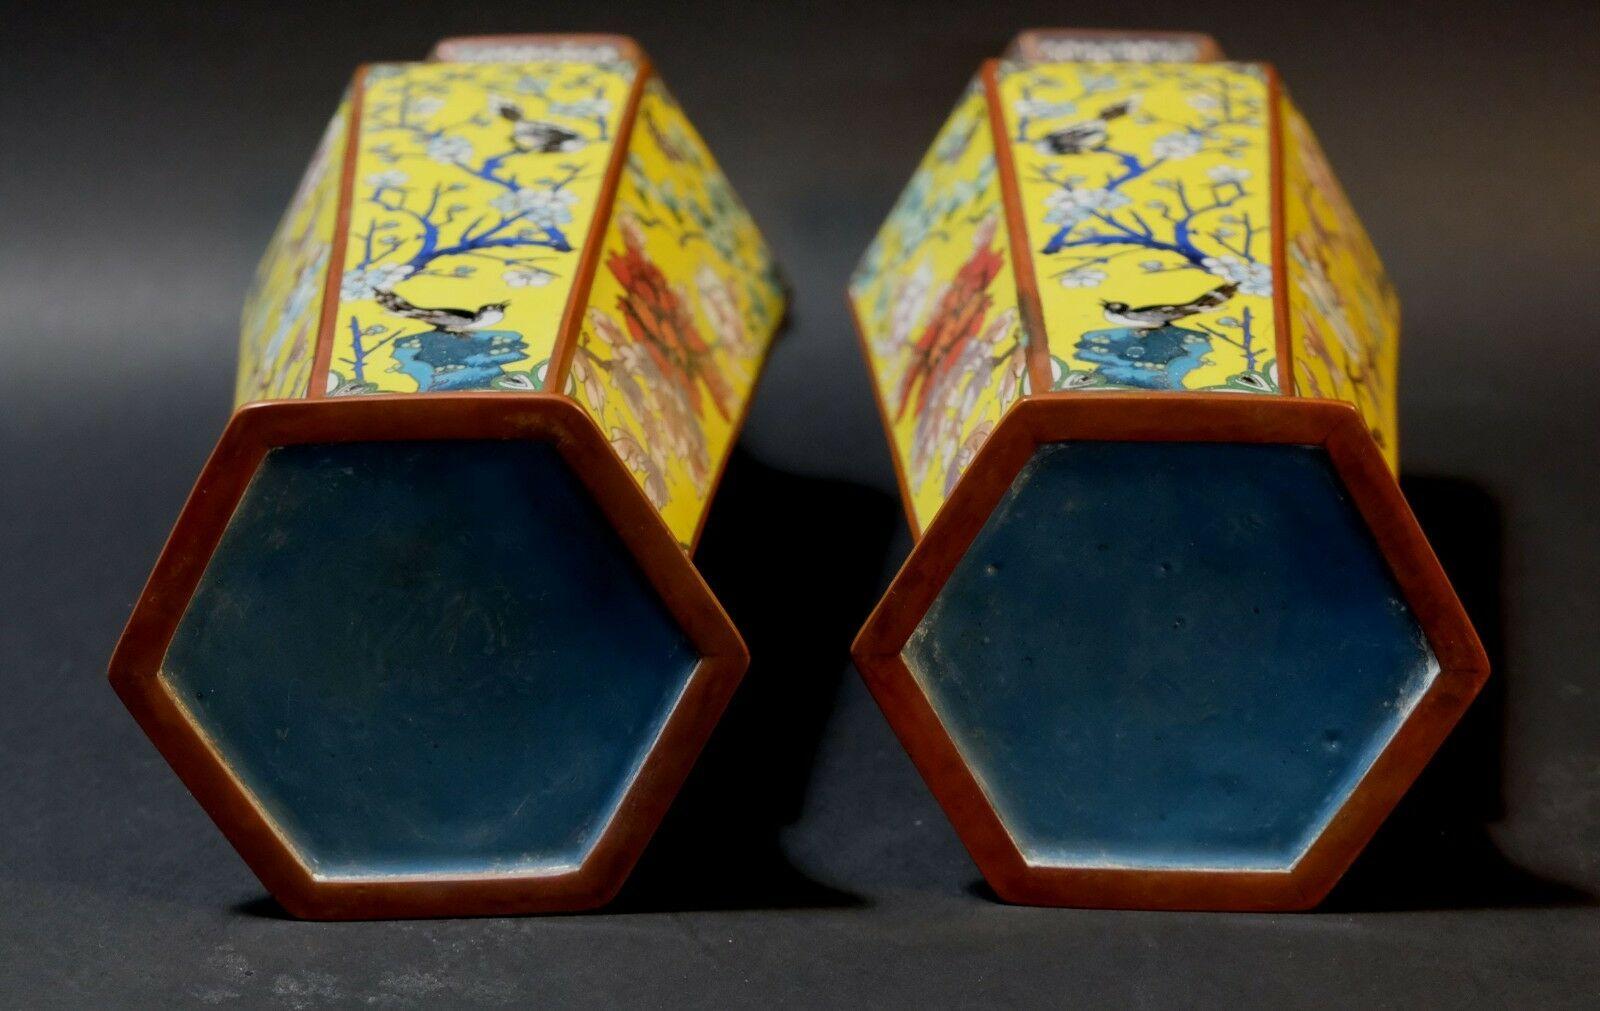 Matching Pair of Pair of French Victorian Cloisonné Vases, 19th Century For Sale 4